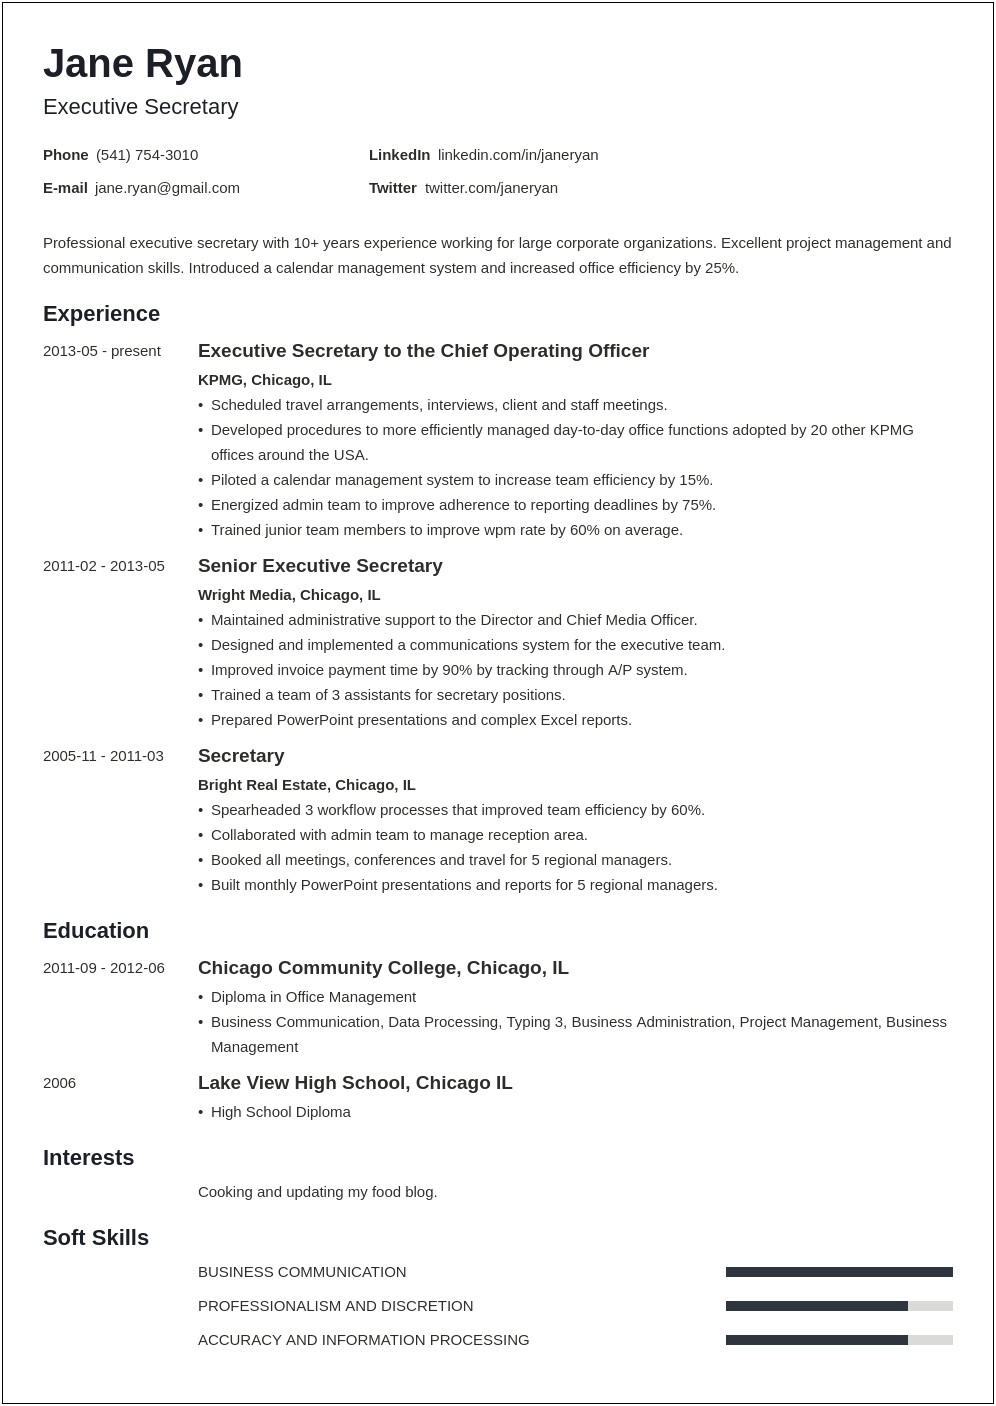 Resume For Secretary With Minimal Experience